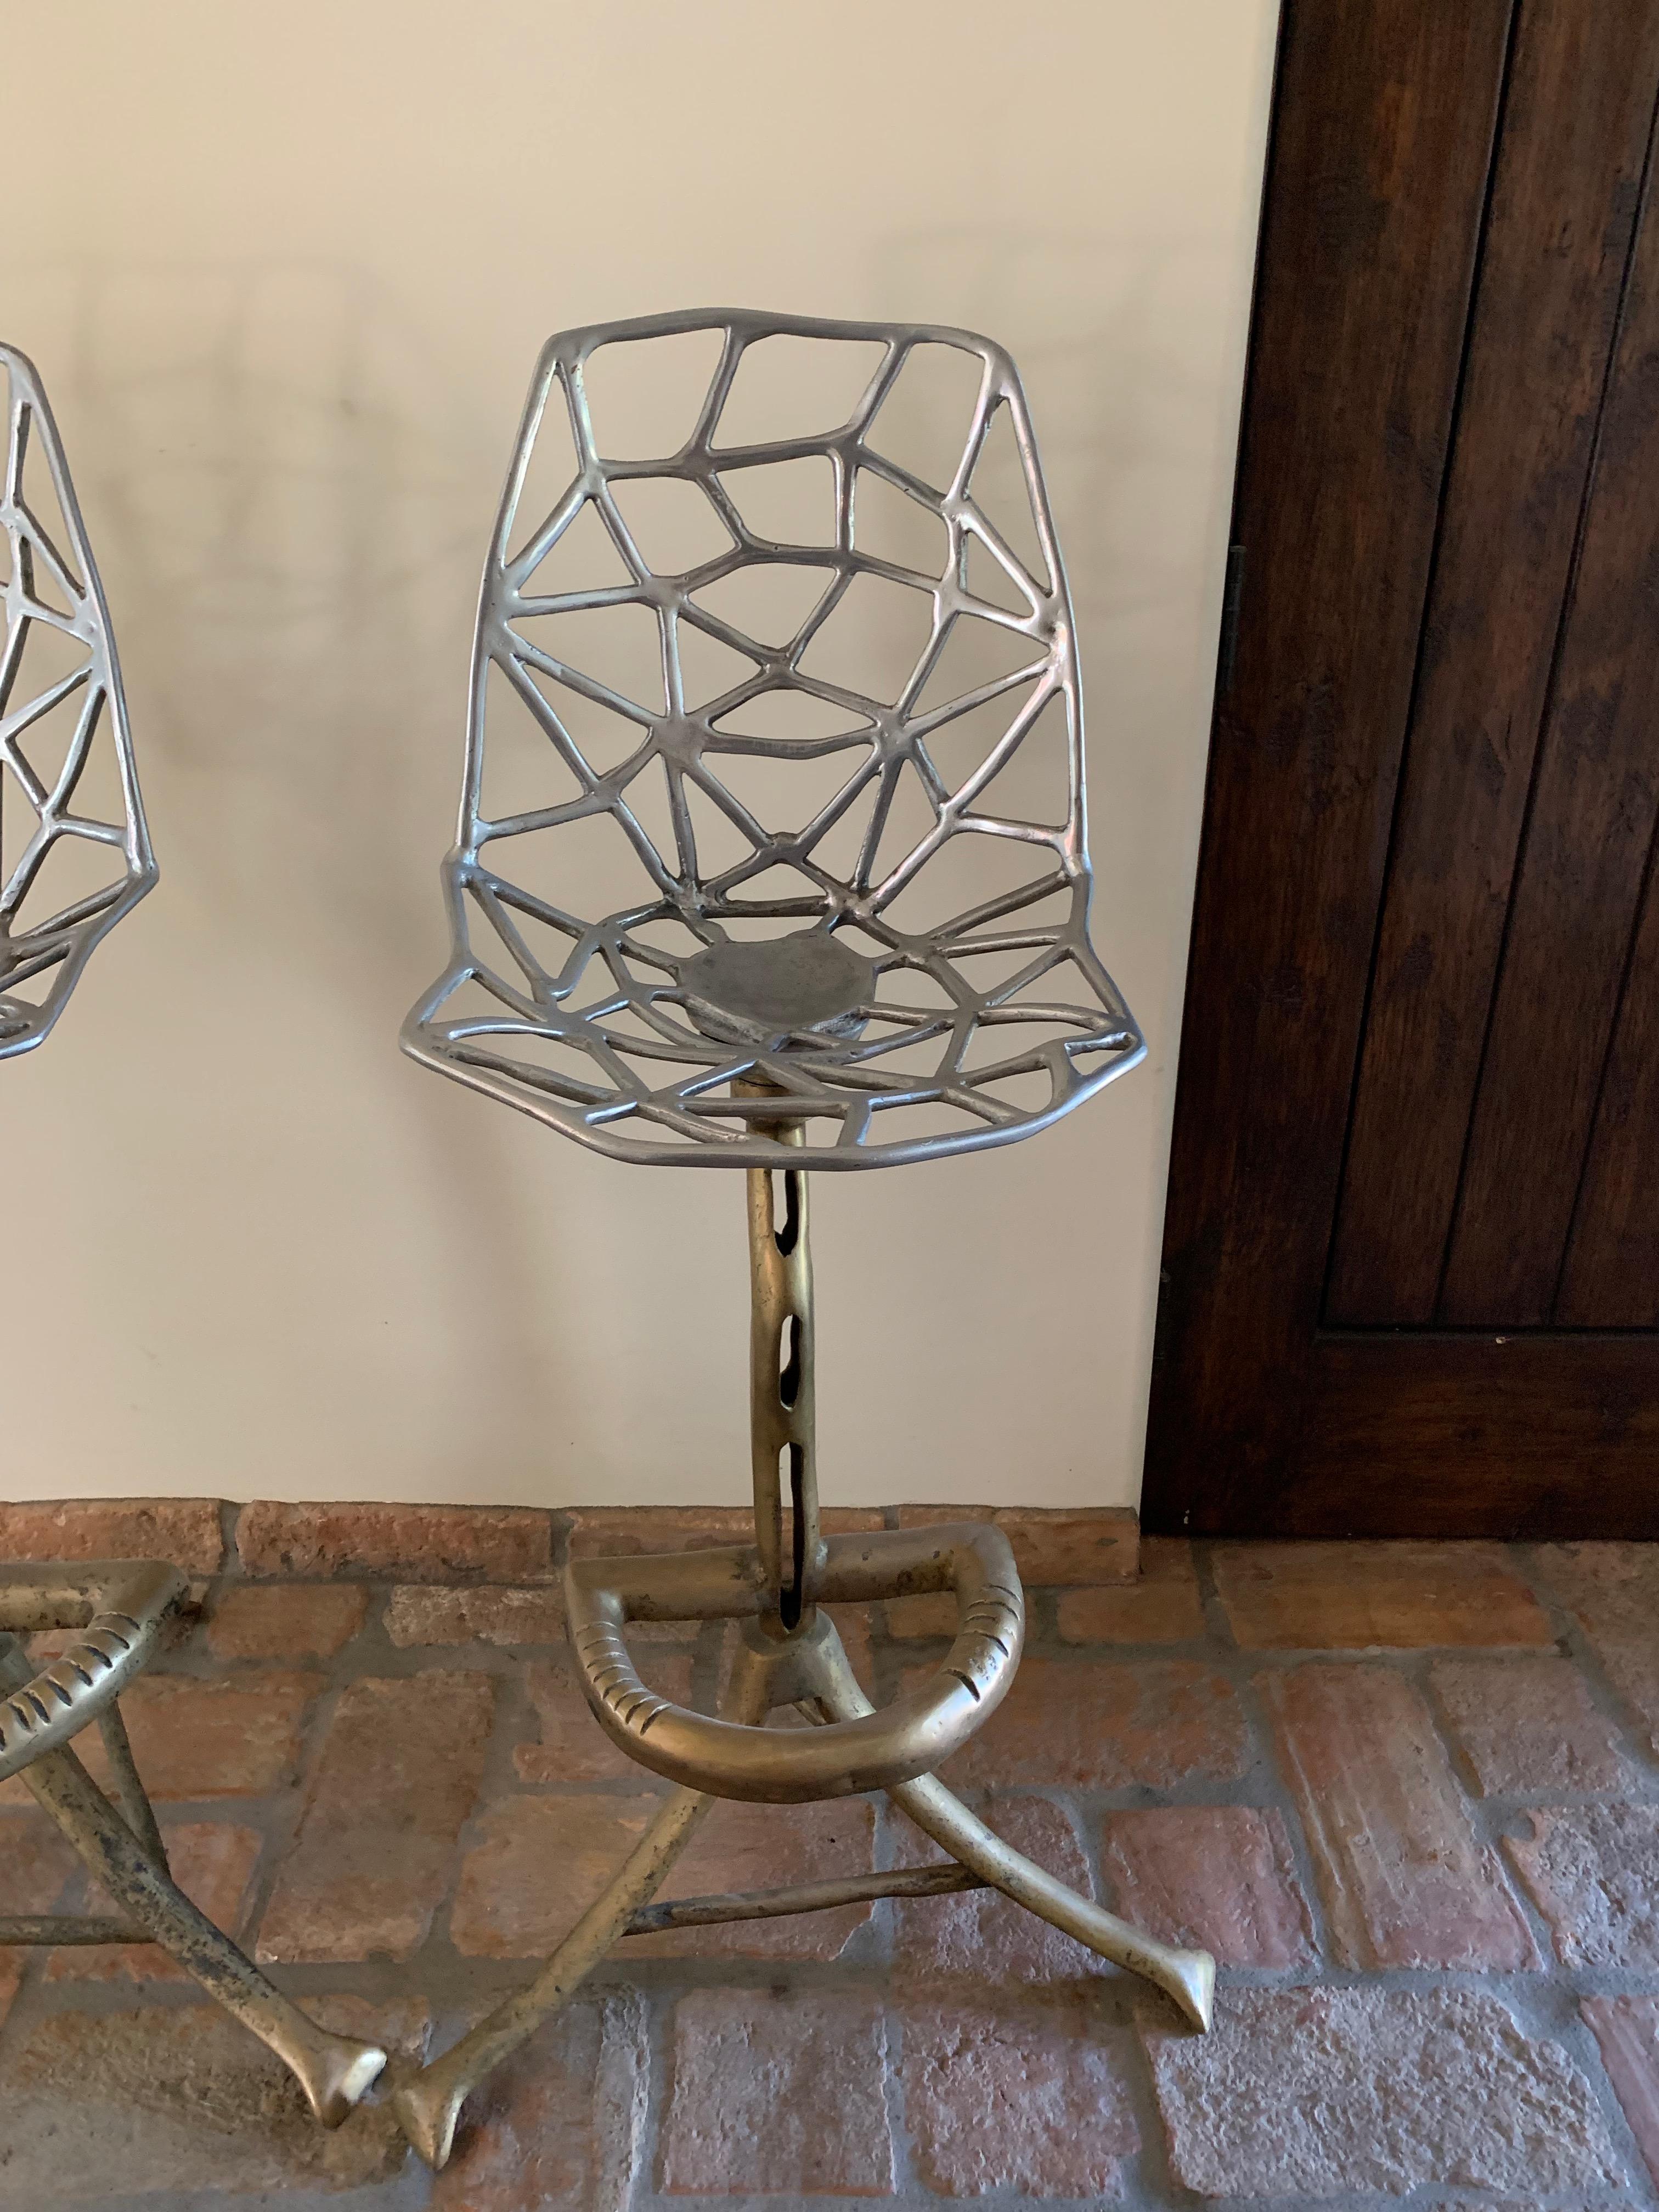 Available are four one-of-a-kind barstools. Custom made pieces of art, they are uniquely designed with a unique bronze base and artistically designed seat and back of aluminum. The four were acquired from a Gentleman's Club in Barcelona. While they